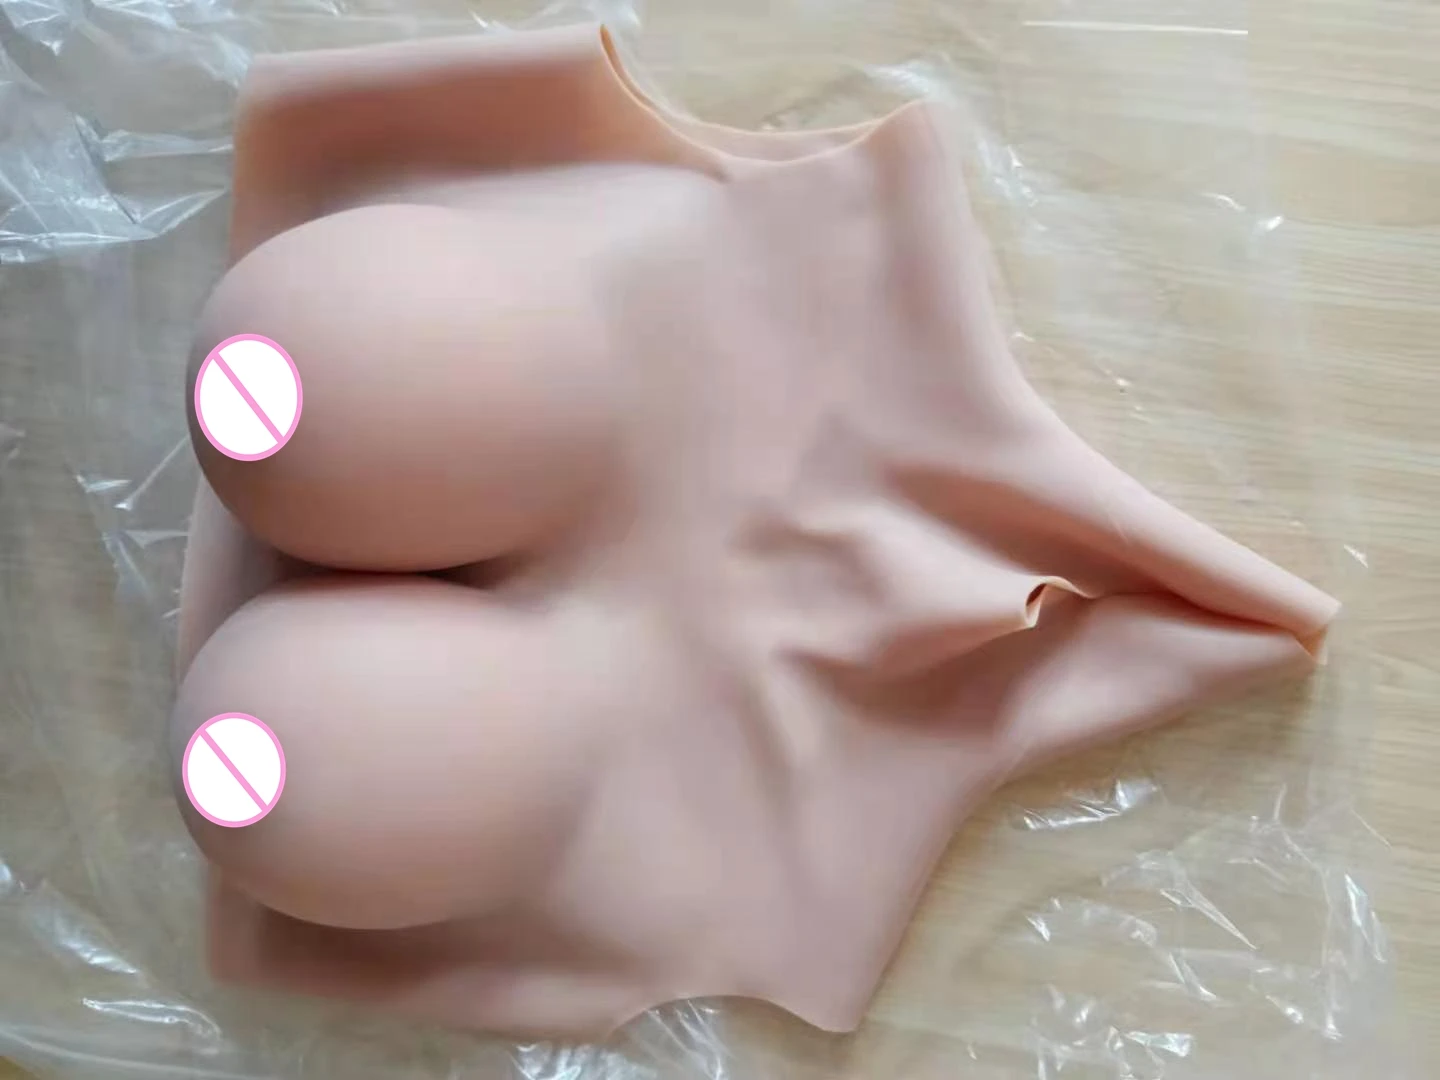 2g-upgrade-bcd-high-collar-neck-fake-artificial-boob-realistic-silicone-breast-forms-crossdresser-shemale-transgender-drag-queen